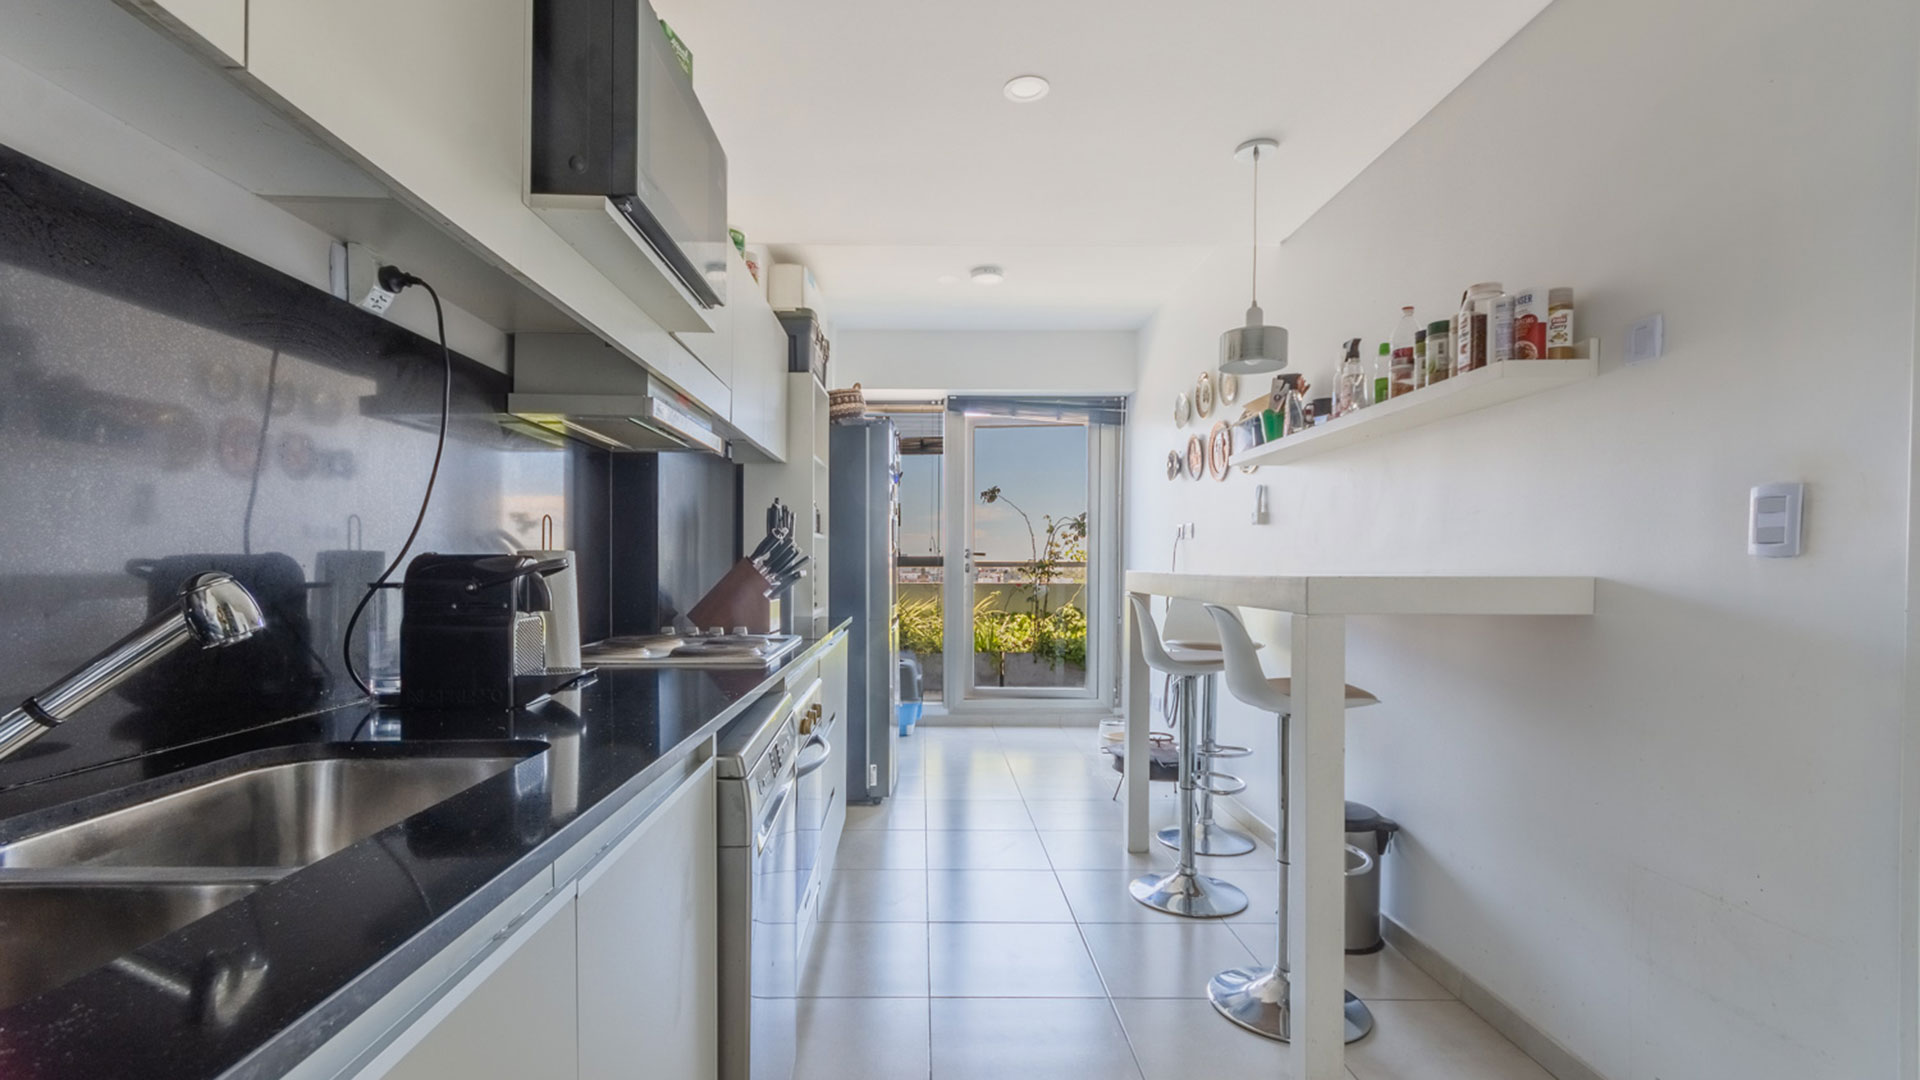 The kitchen is long and is connected to the laundry room.  Currently there are not many triplexes for sale in Buenos Aires